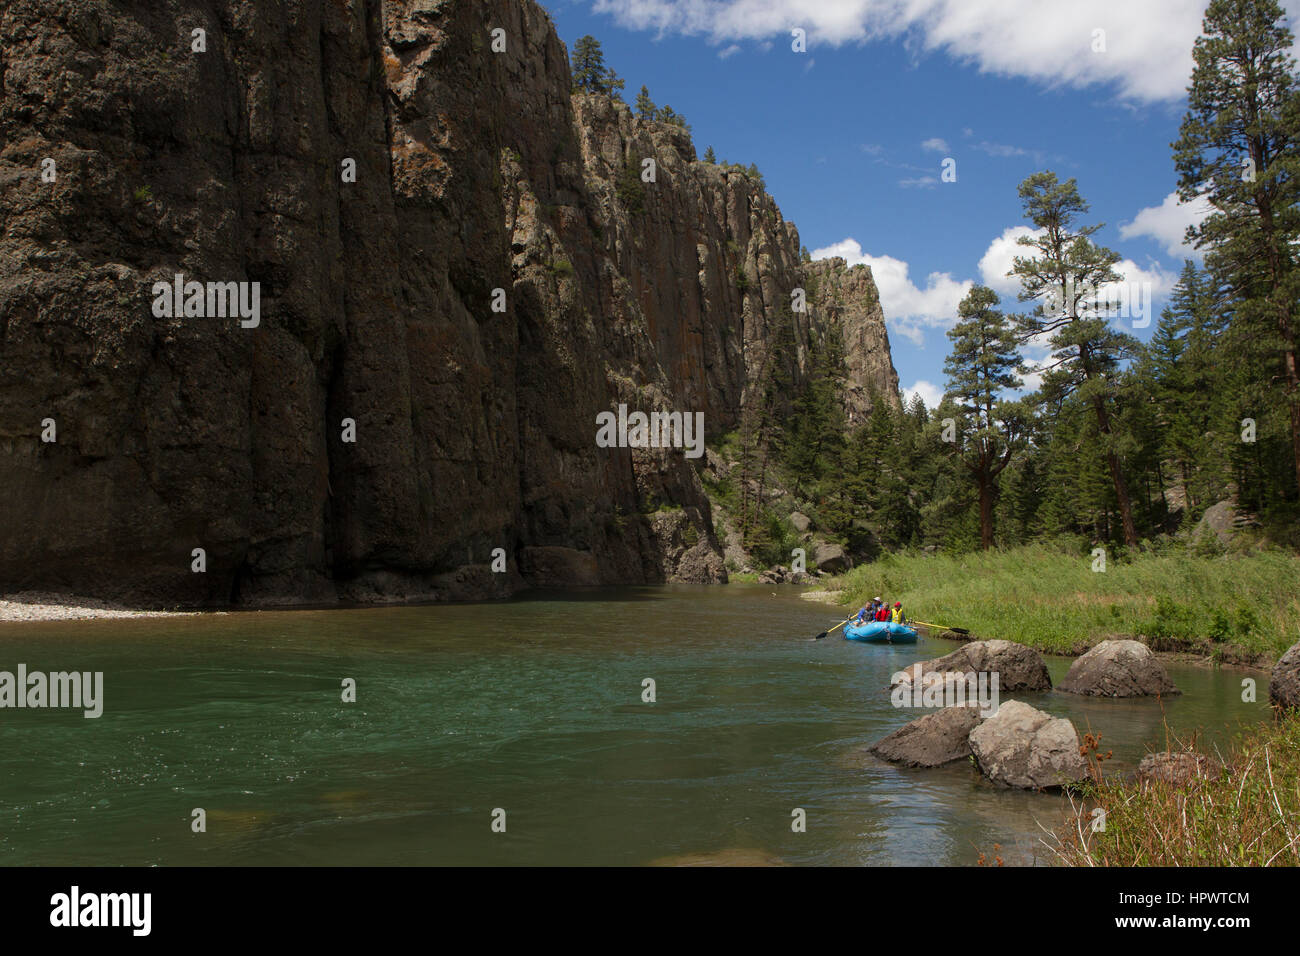 Rafters enjoy a quiet section of the Dearborn River beneath soaring cliffs, Cascade County, MT. Stock Photo